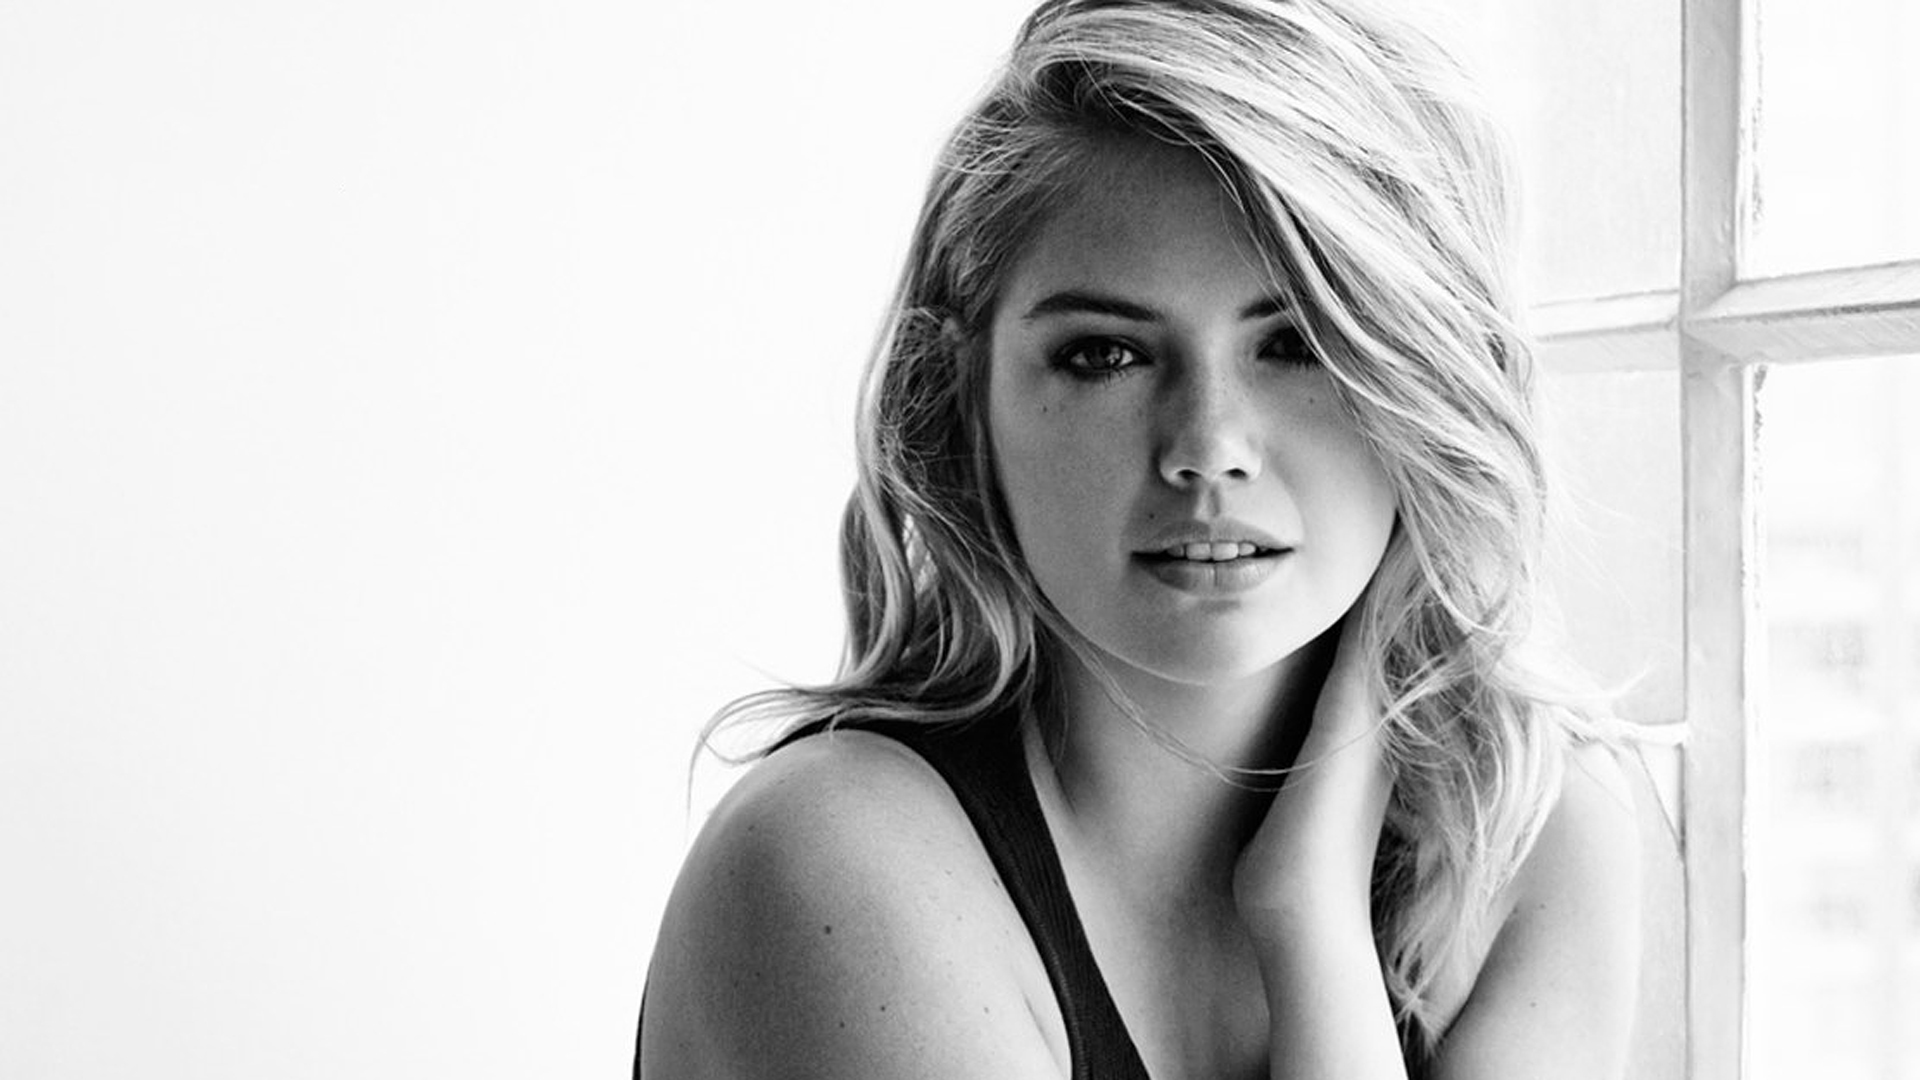 Kate Upton Wallpaper Image Photos Pictures Background